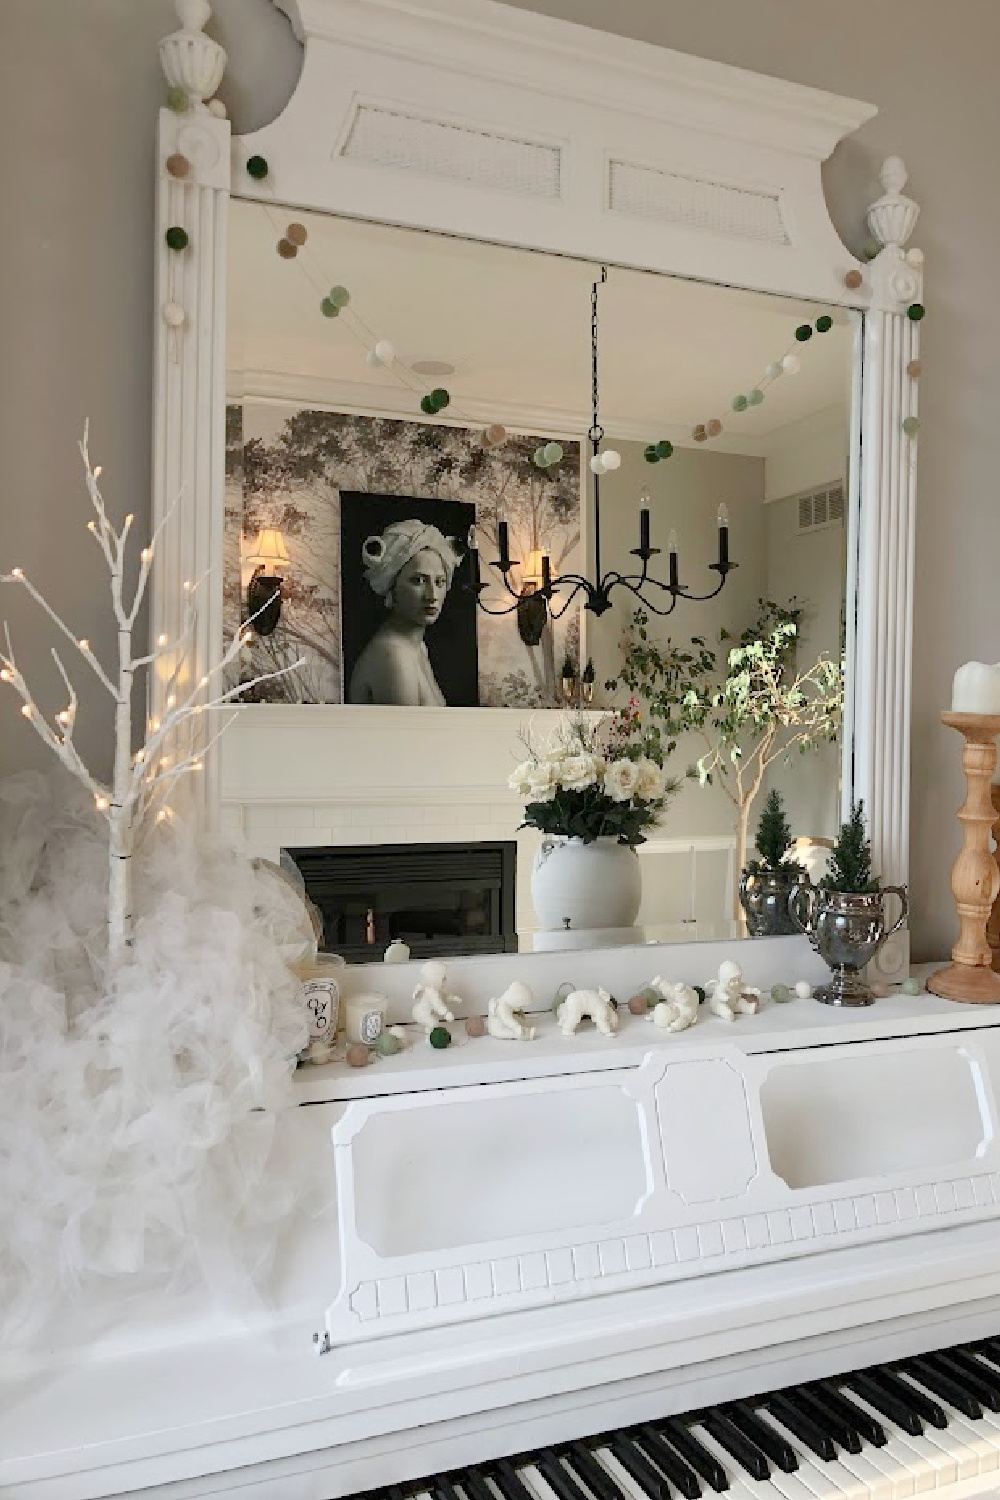 My white piano decorated for holidays with snow babies, snowy birch tree, and felt garland - Hello Lovely Studio.